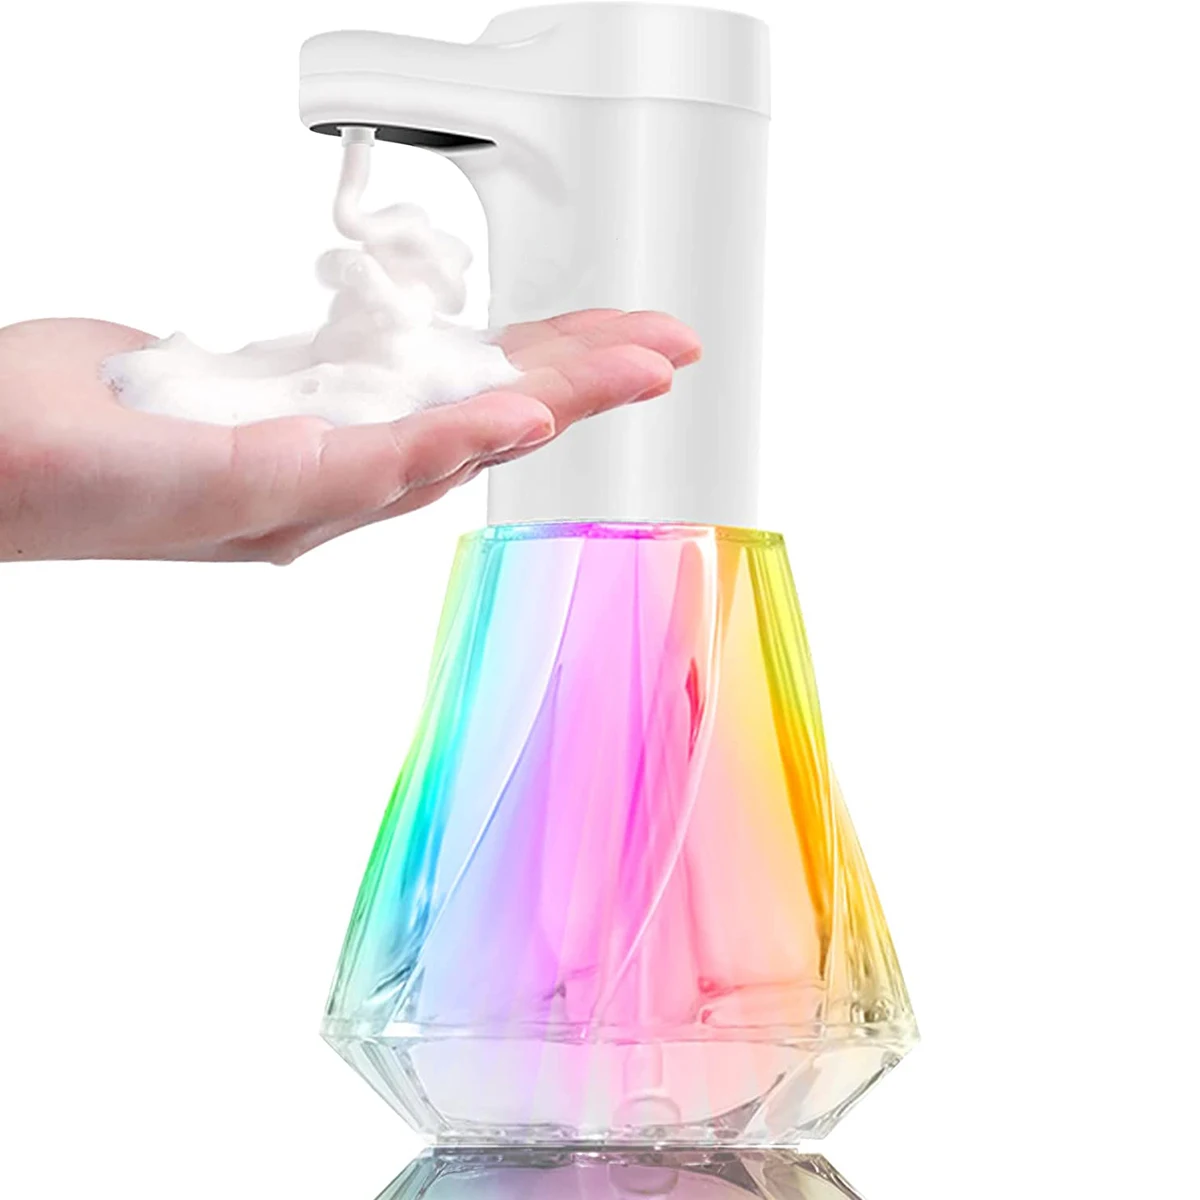 

Automatic Foaming Soap Dispenser 430ml/15.2oz Rechargeable Hand Sanitizer Dispenser with 3-Level Adjustable and 12-Color Light